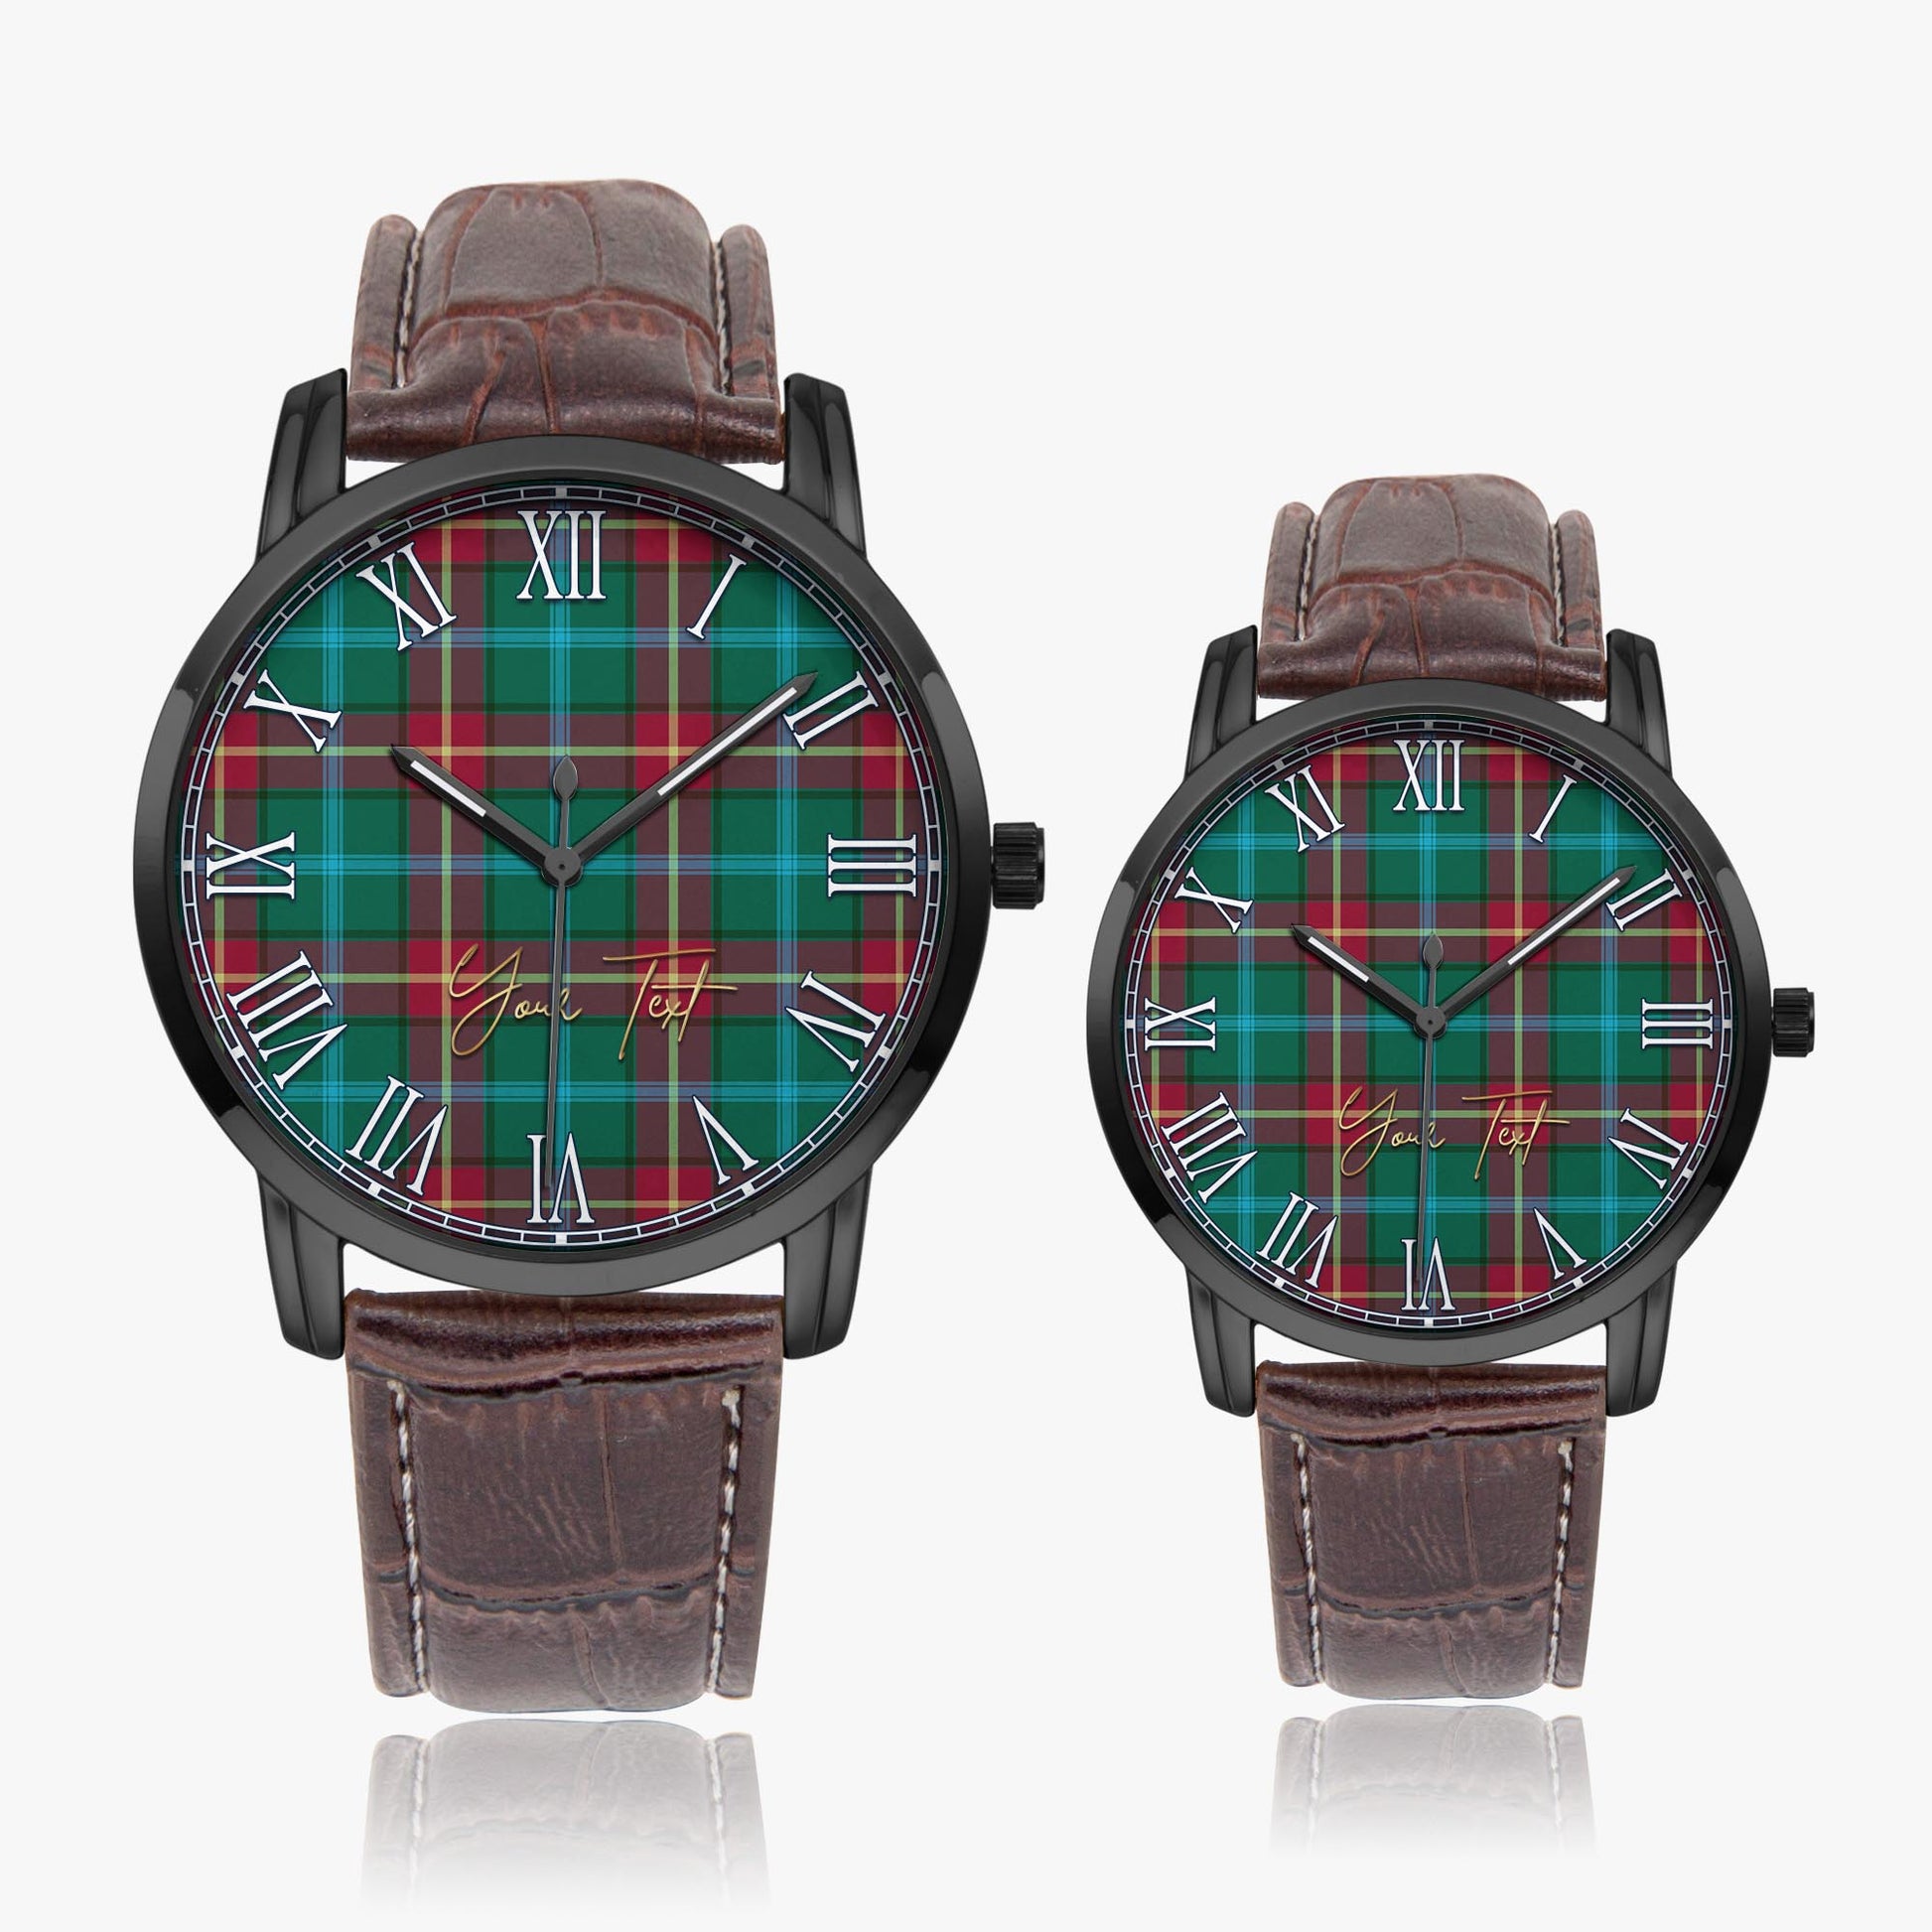 Manitoba Province Canada Tartan Personalized Your Text Leather Trap Quartz Watch Wide Type Black Case With Brown Leather Strap - Tartanvibesclothing